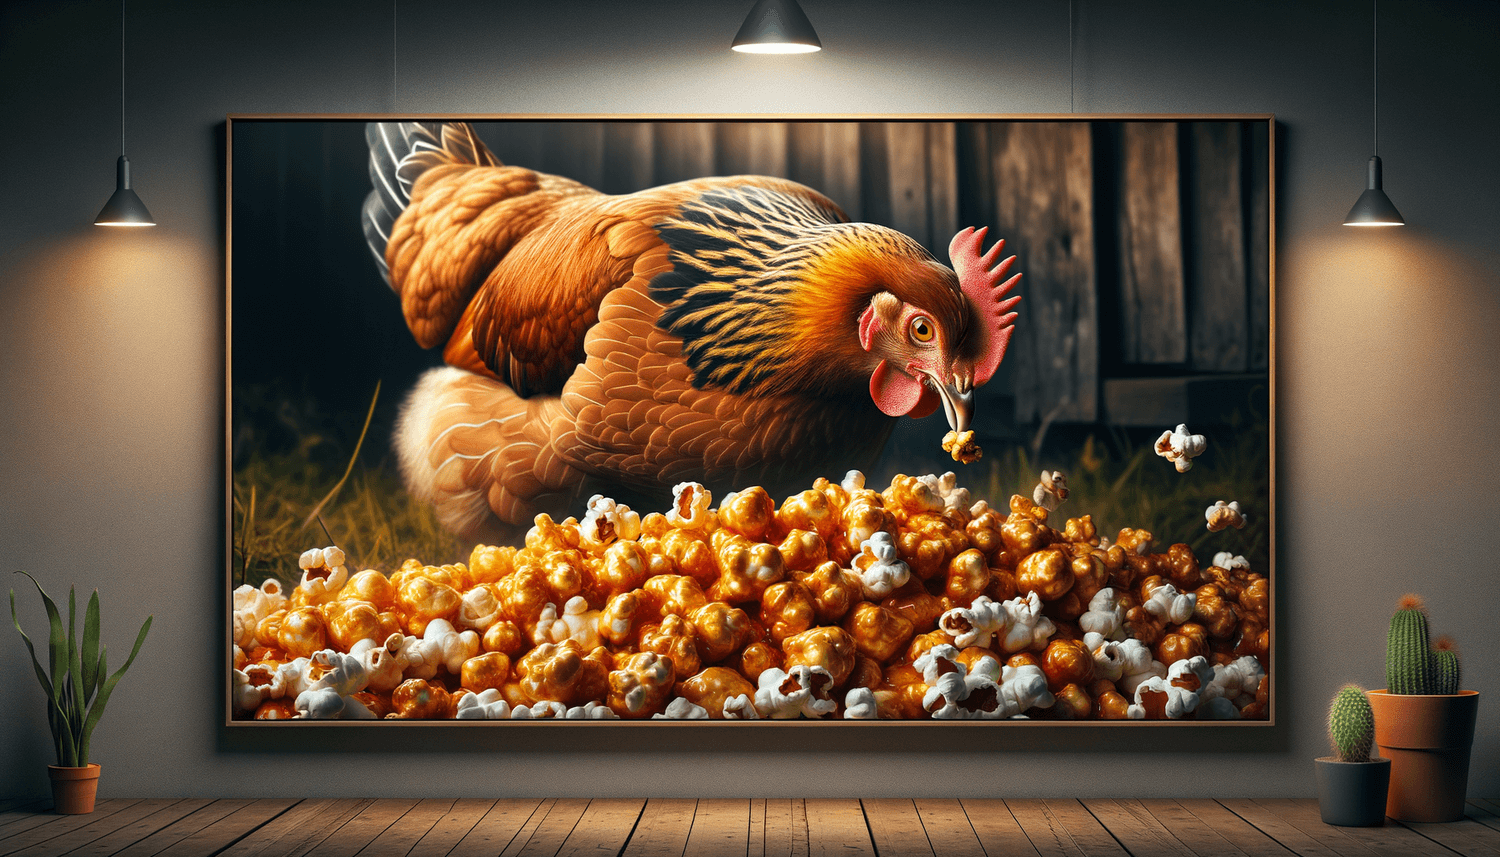 Can Chickens Eat Caramel Popcorn?